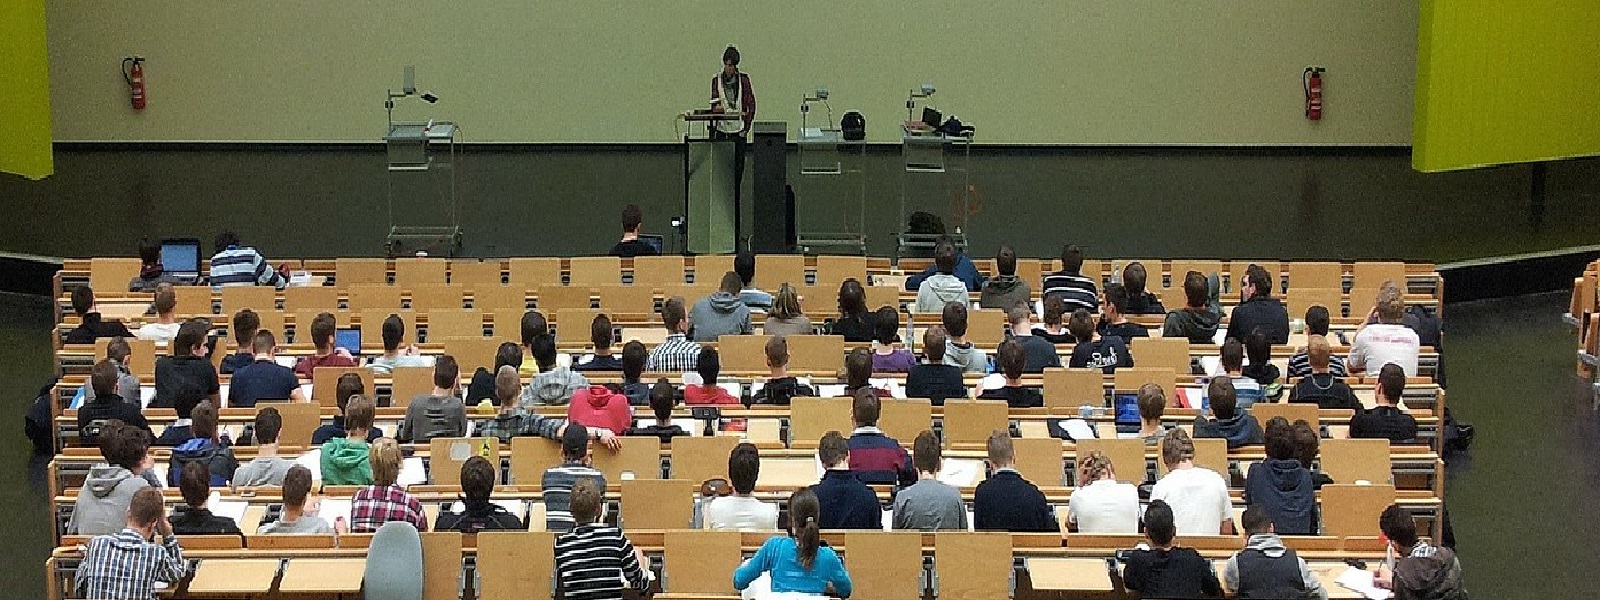 An academic teaching students in a lecture theatre